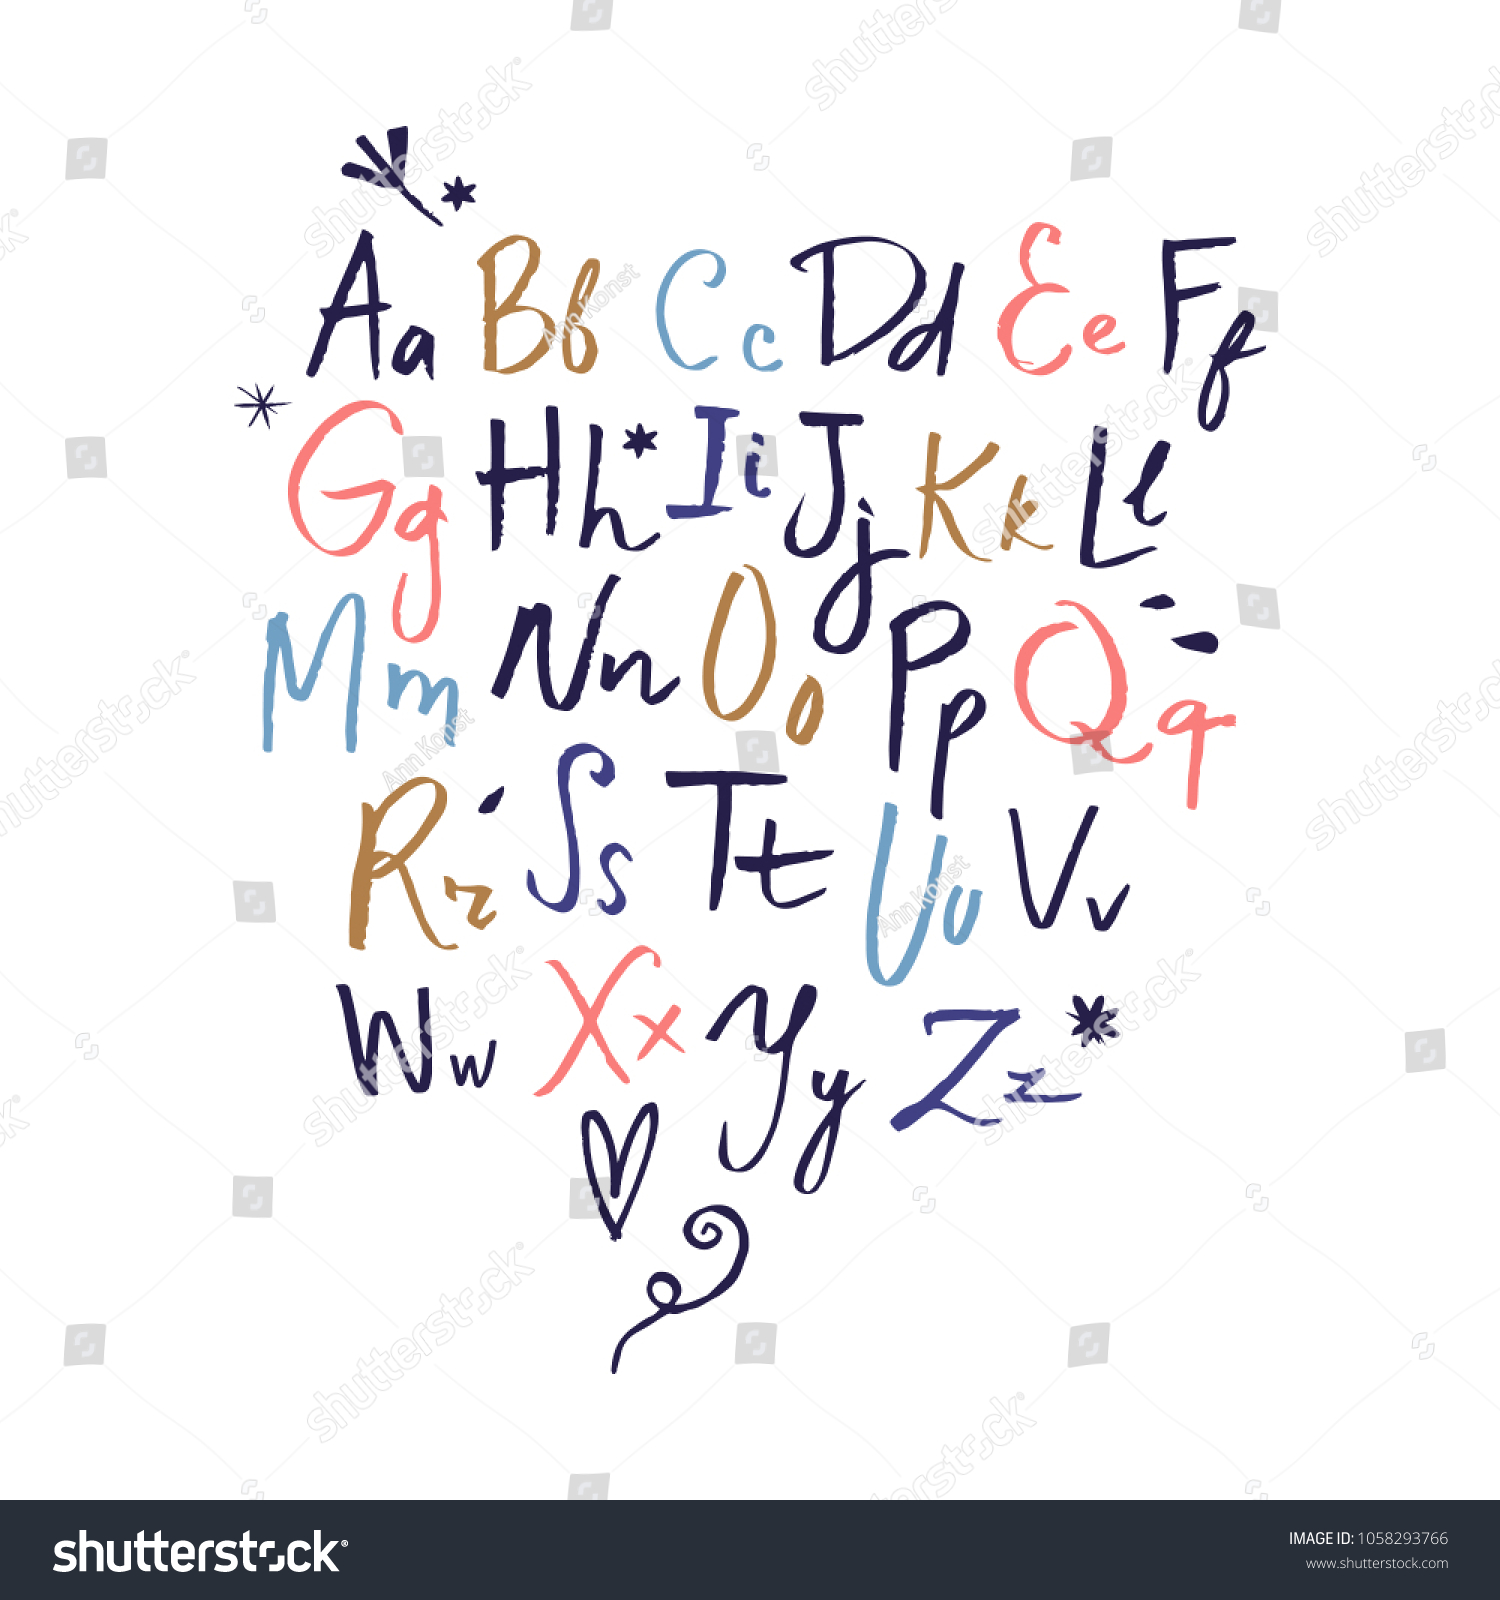 24,270 Calligraphy clipart Images, Stock Photos & Vectors | Shutterstock